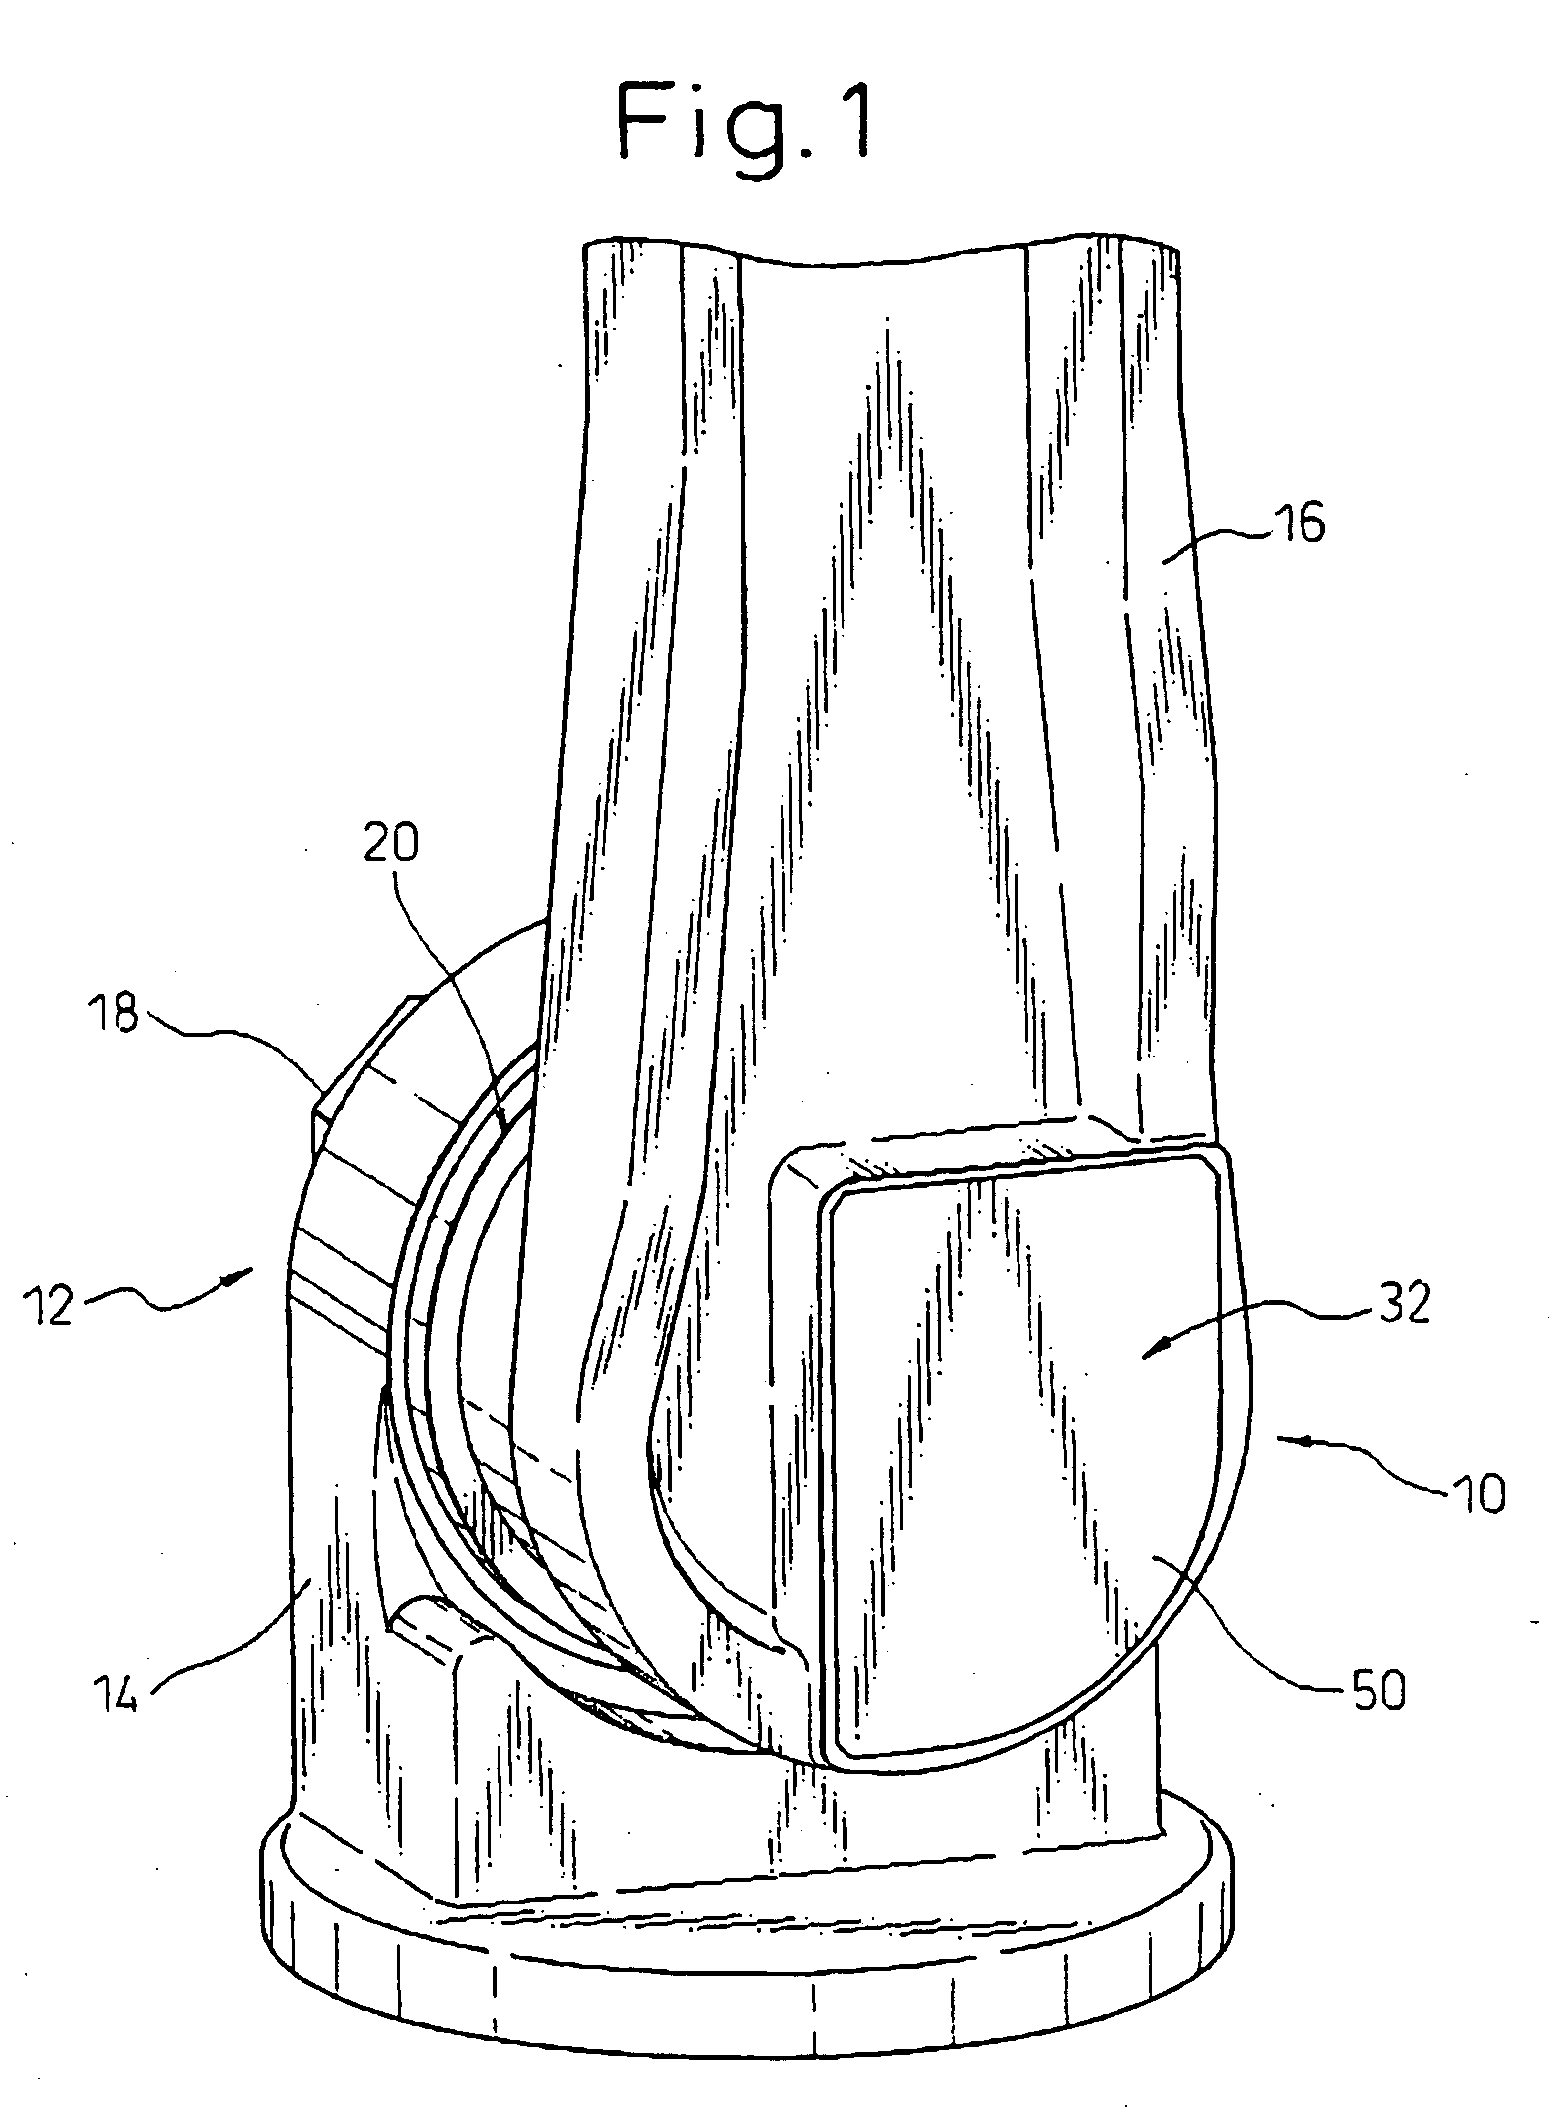 Lubricant draining device